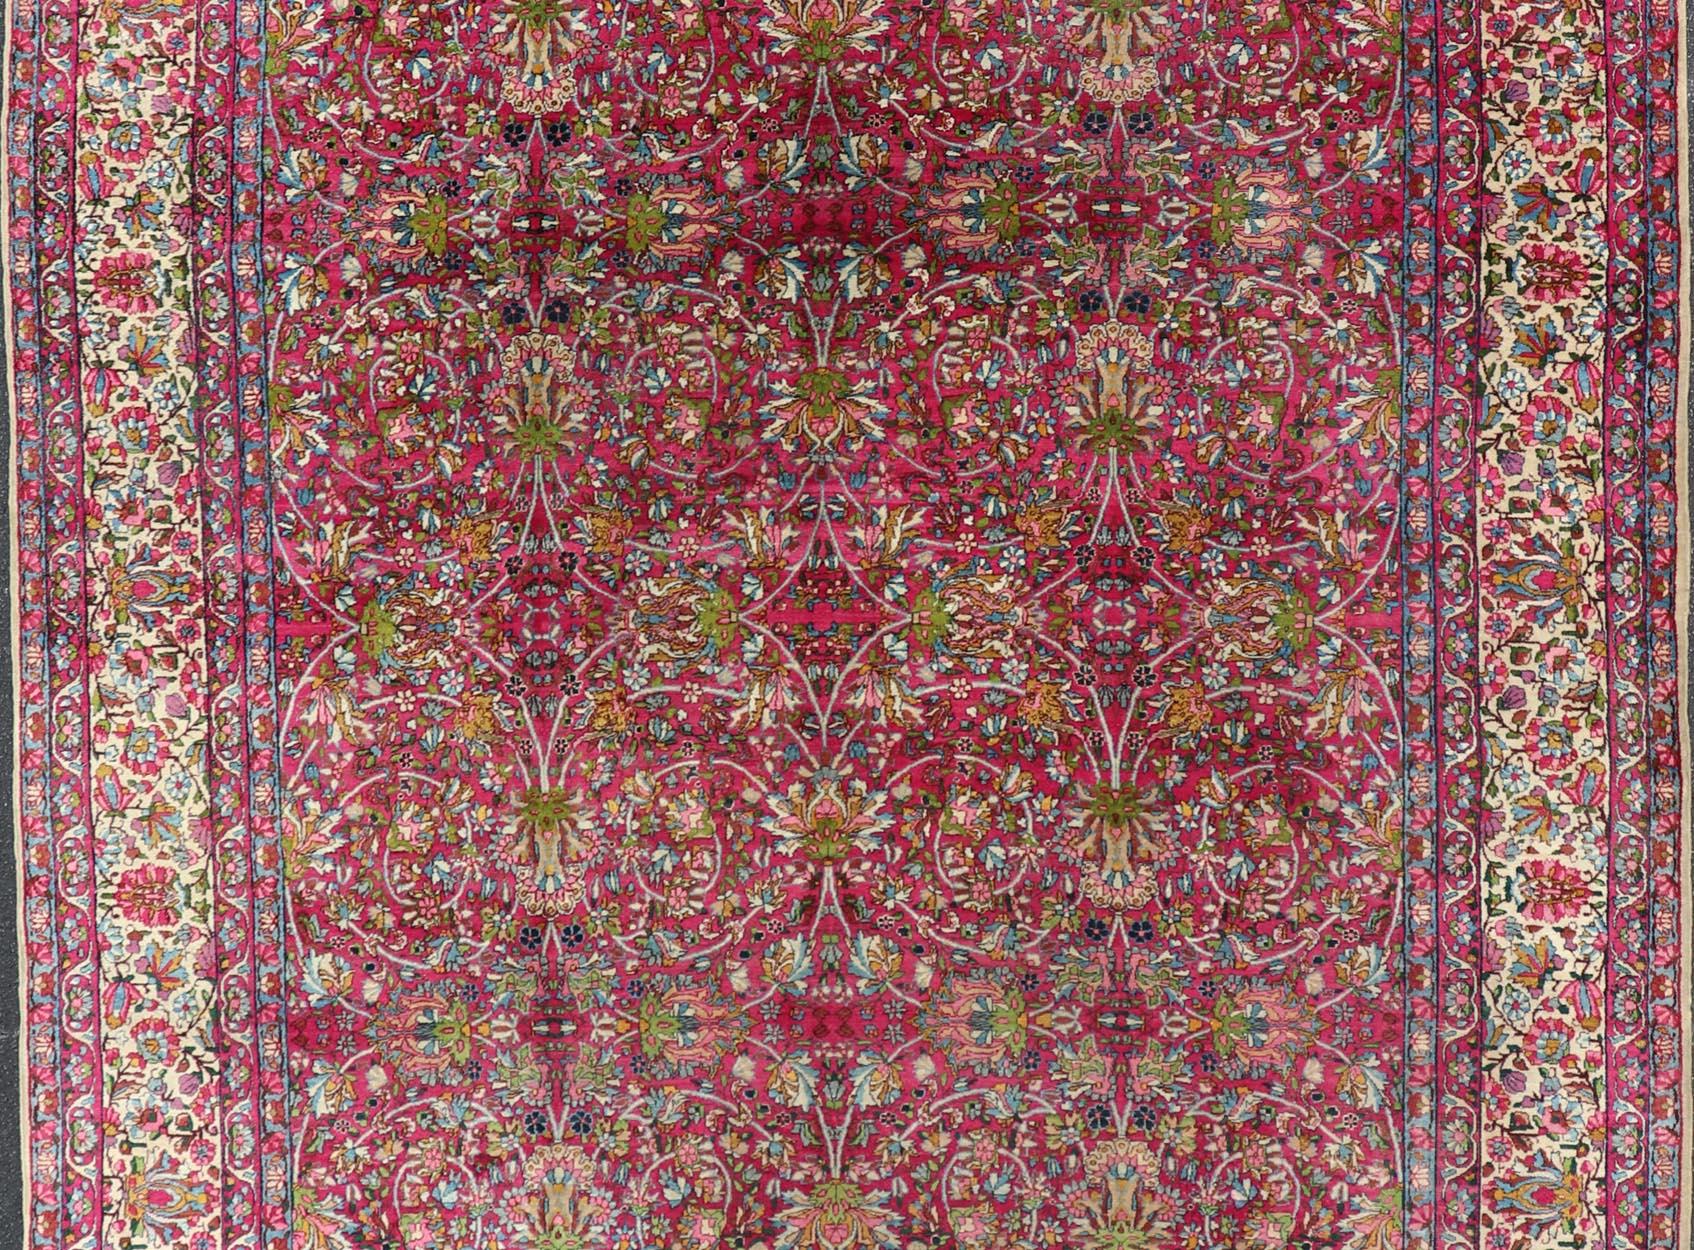  Antique Persian Lavar Kerman Rug with All-Over Floral Design In Jewel Tones  For Sale 1